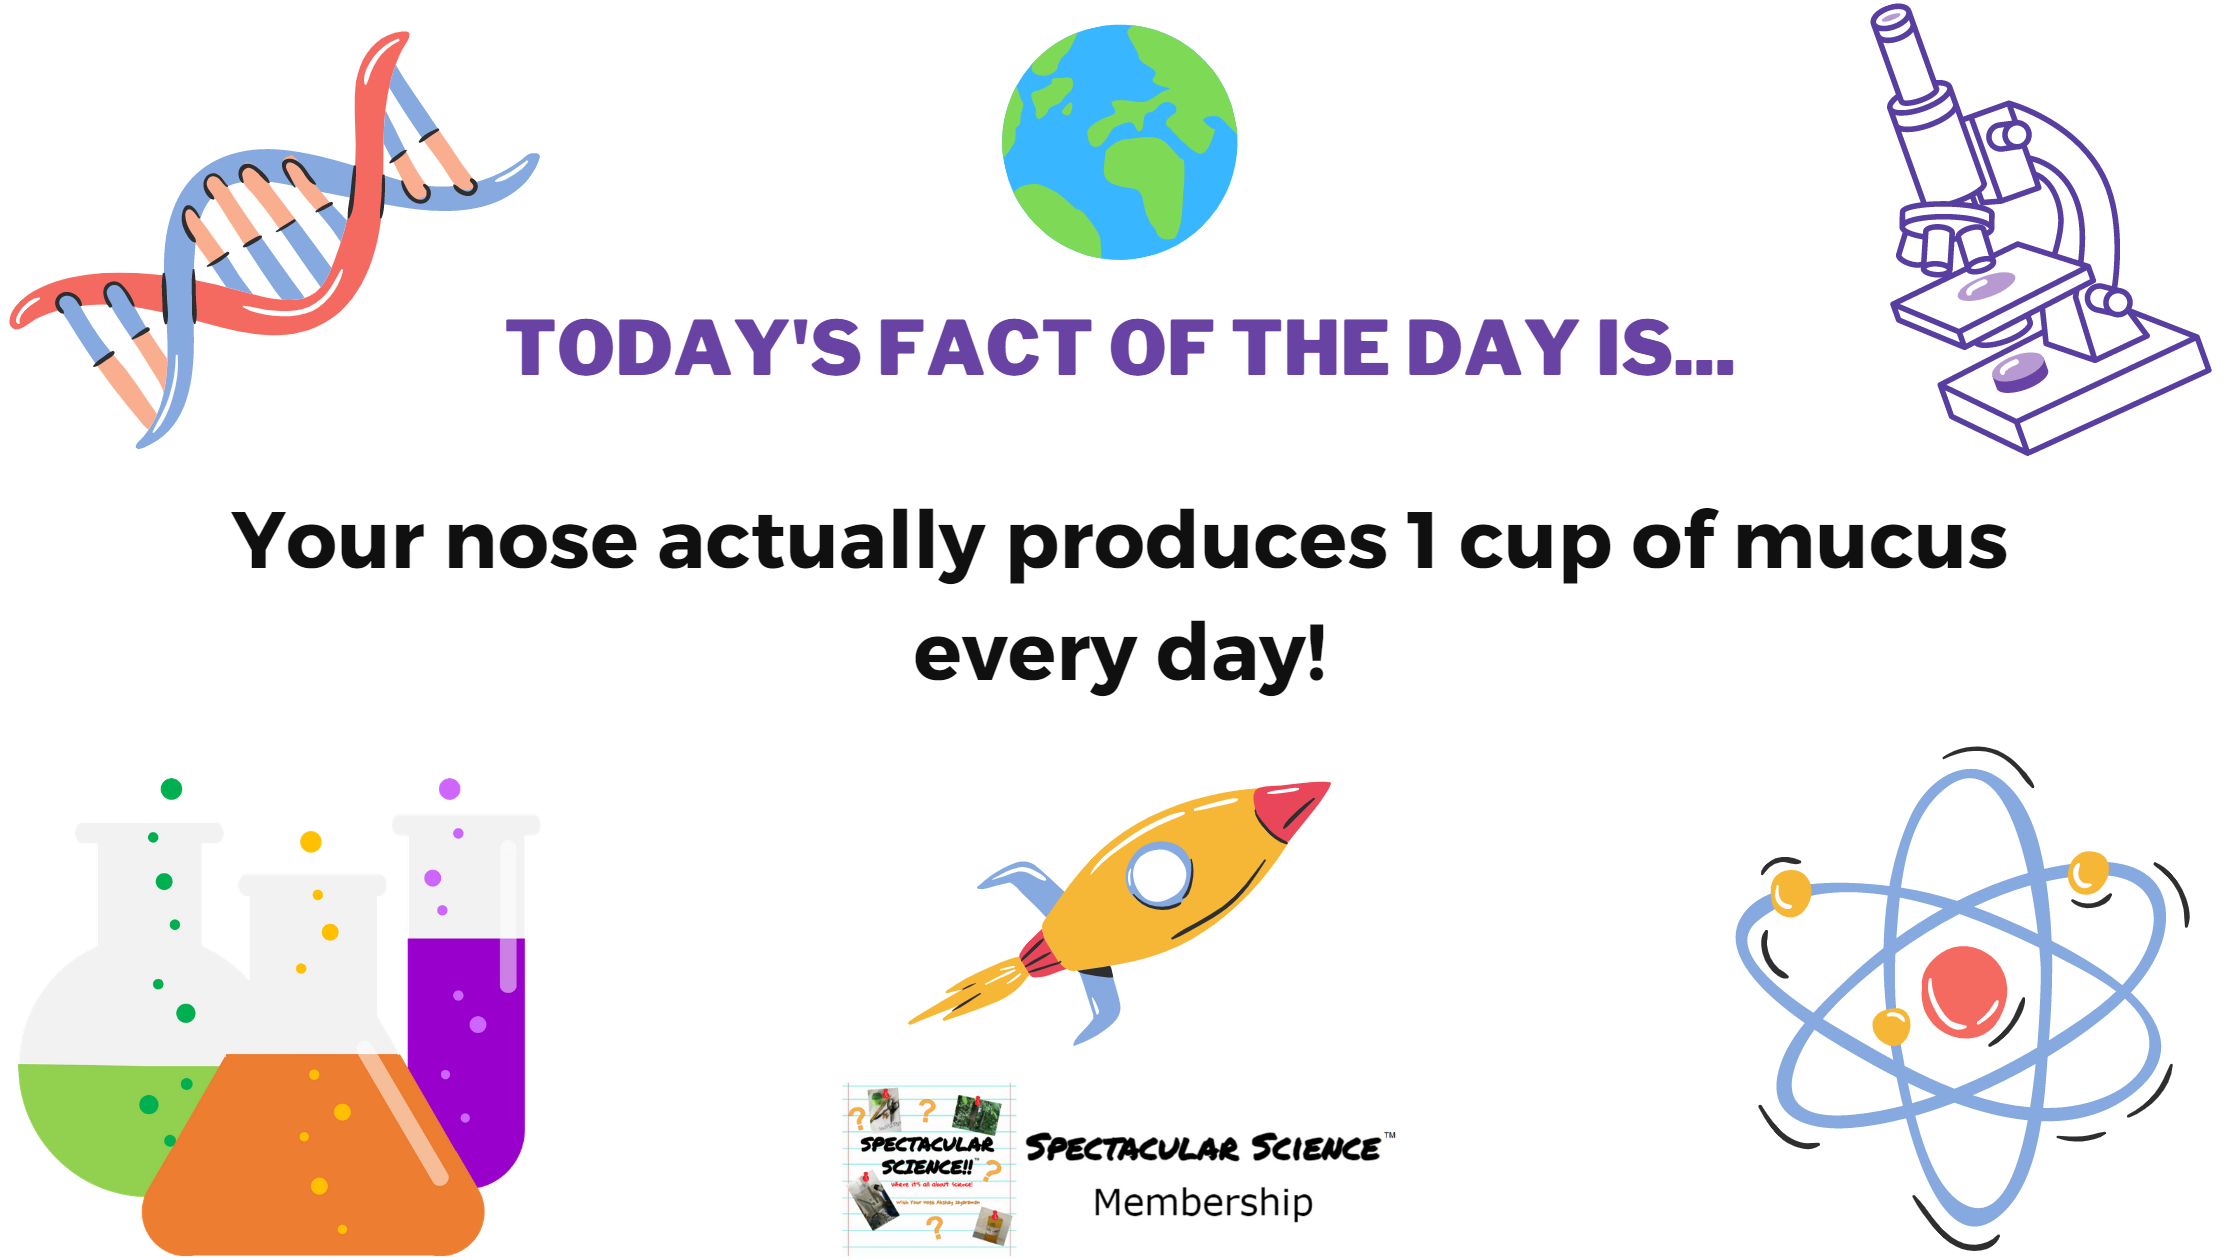 Fact of the Day Image May 7